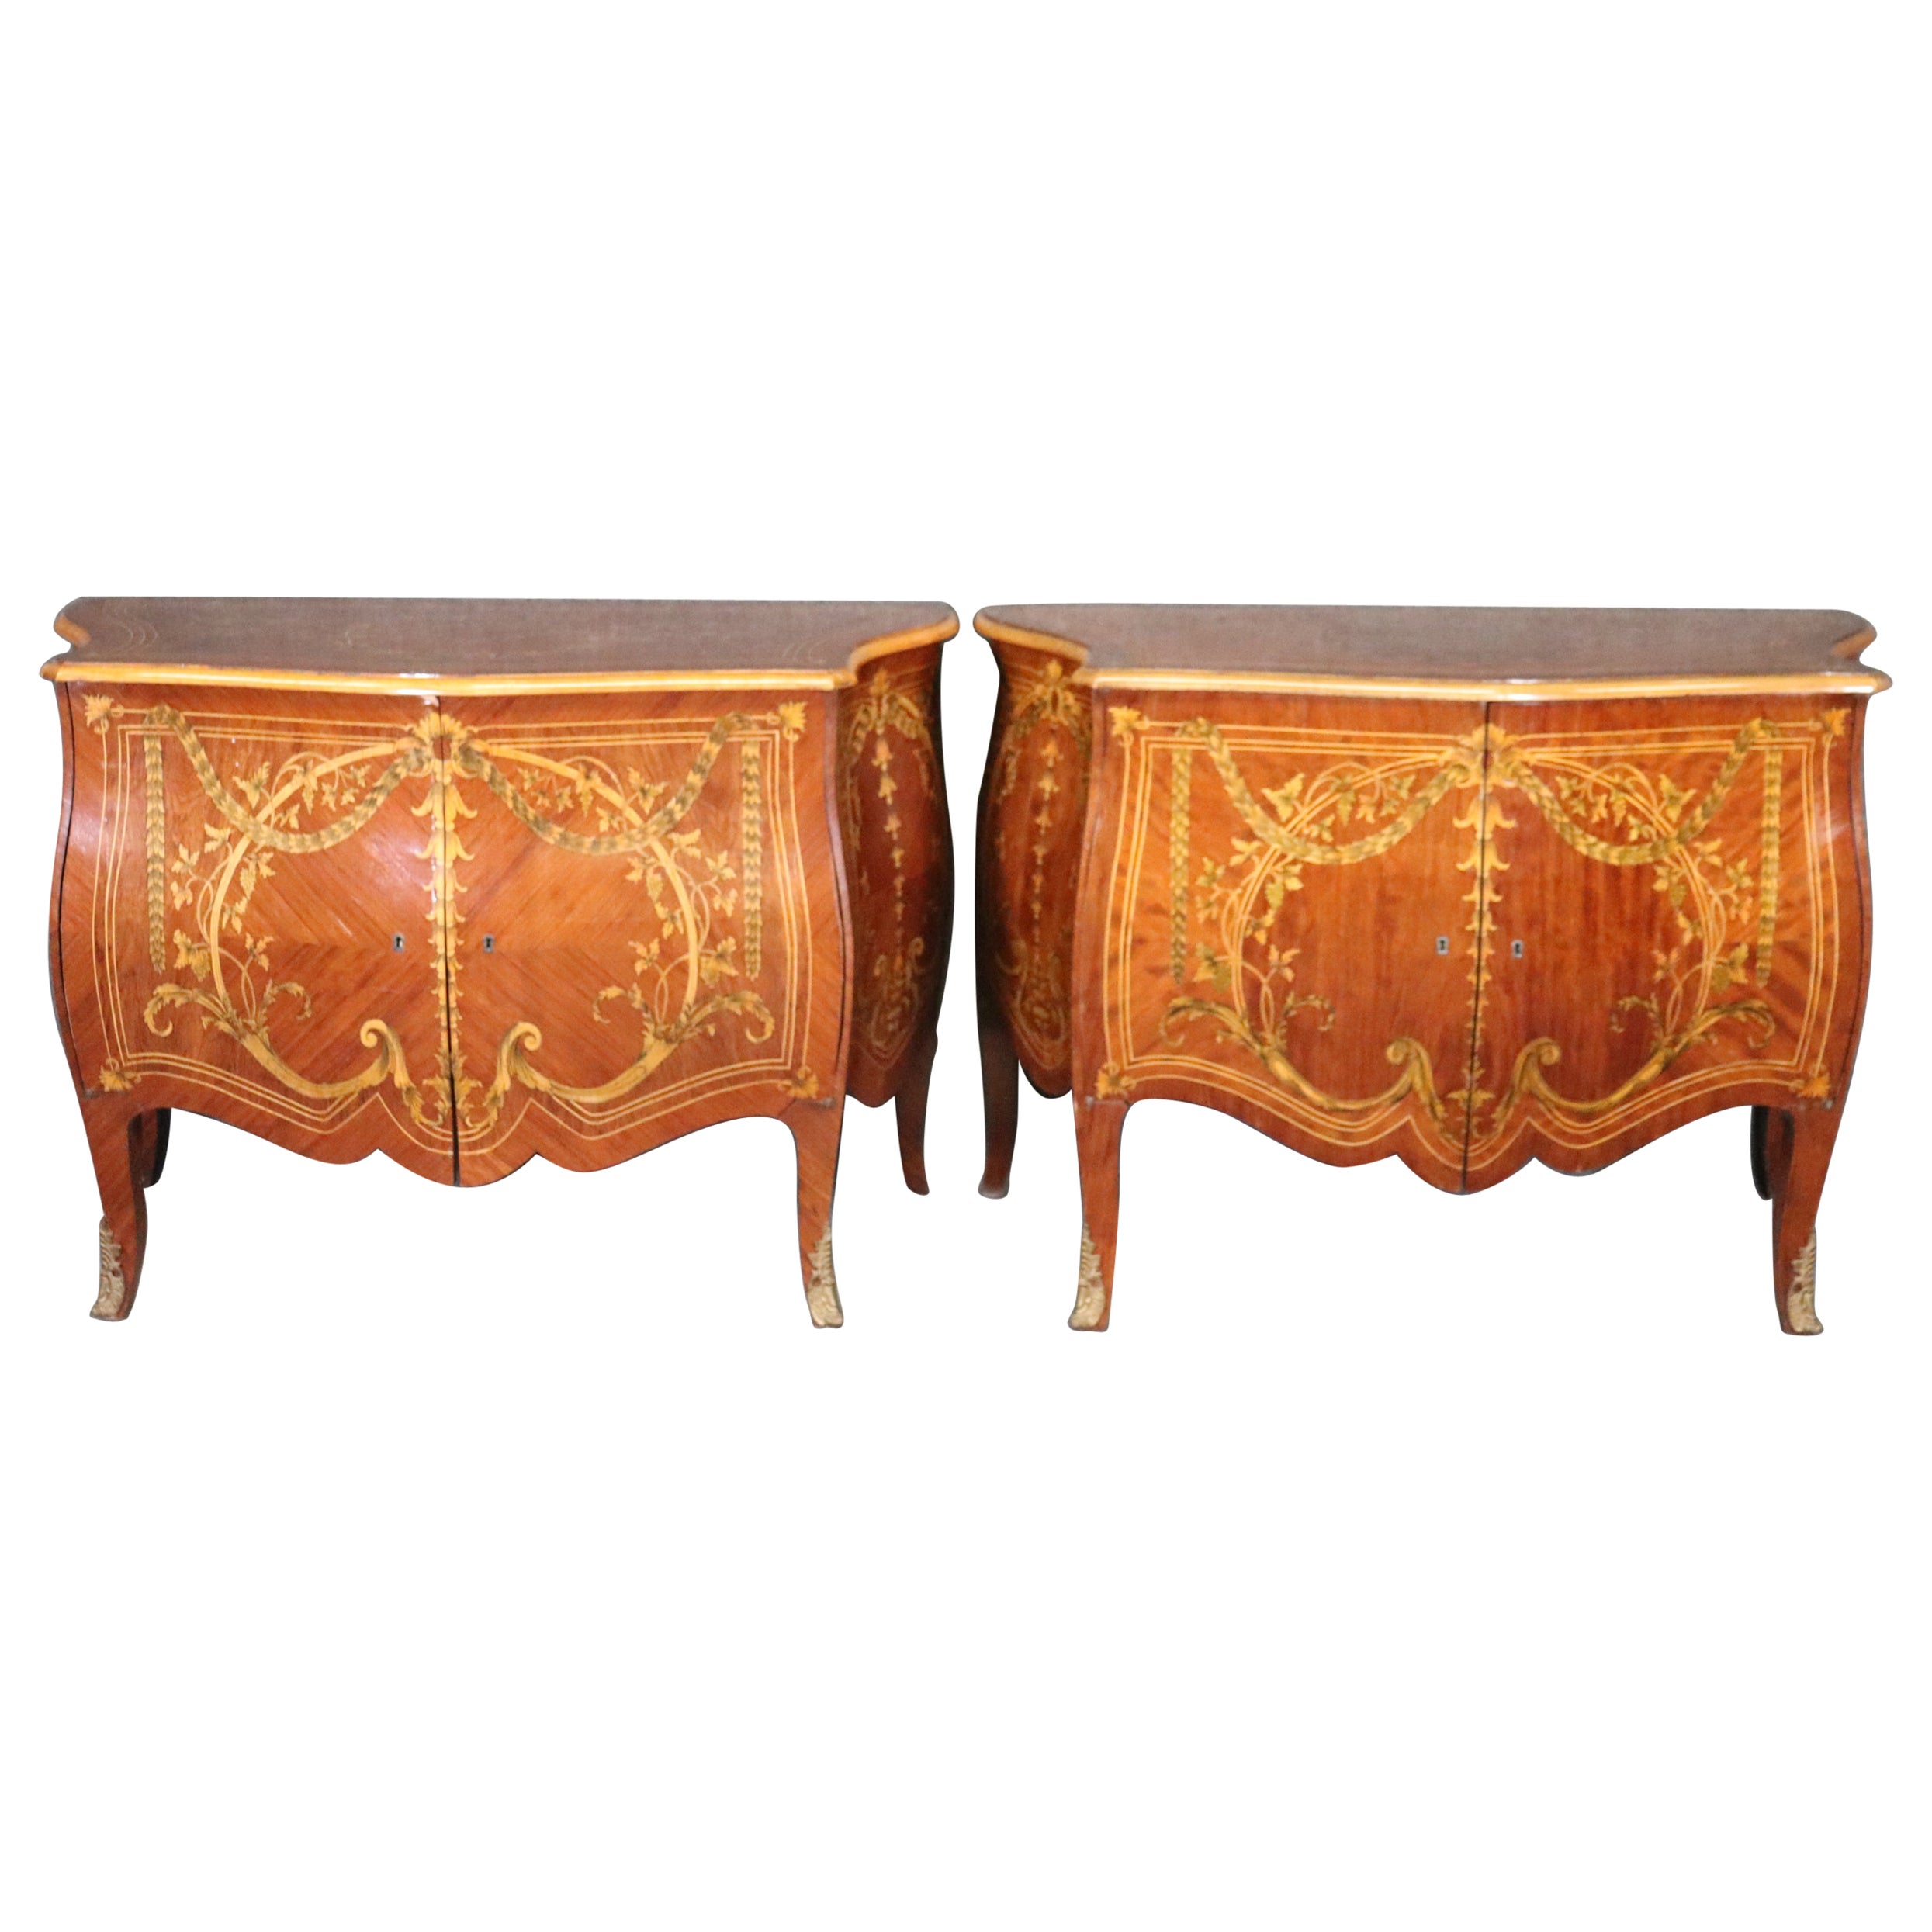 Pair Large Scale Italian Maggiolini Inlaid Bombe Louis XV Commodes For Sale